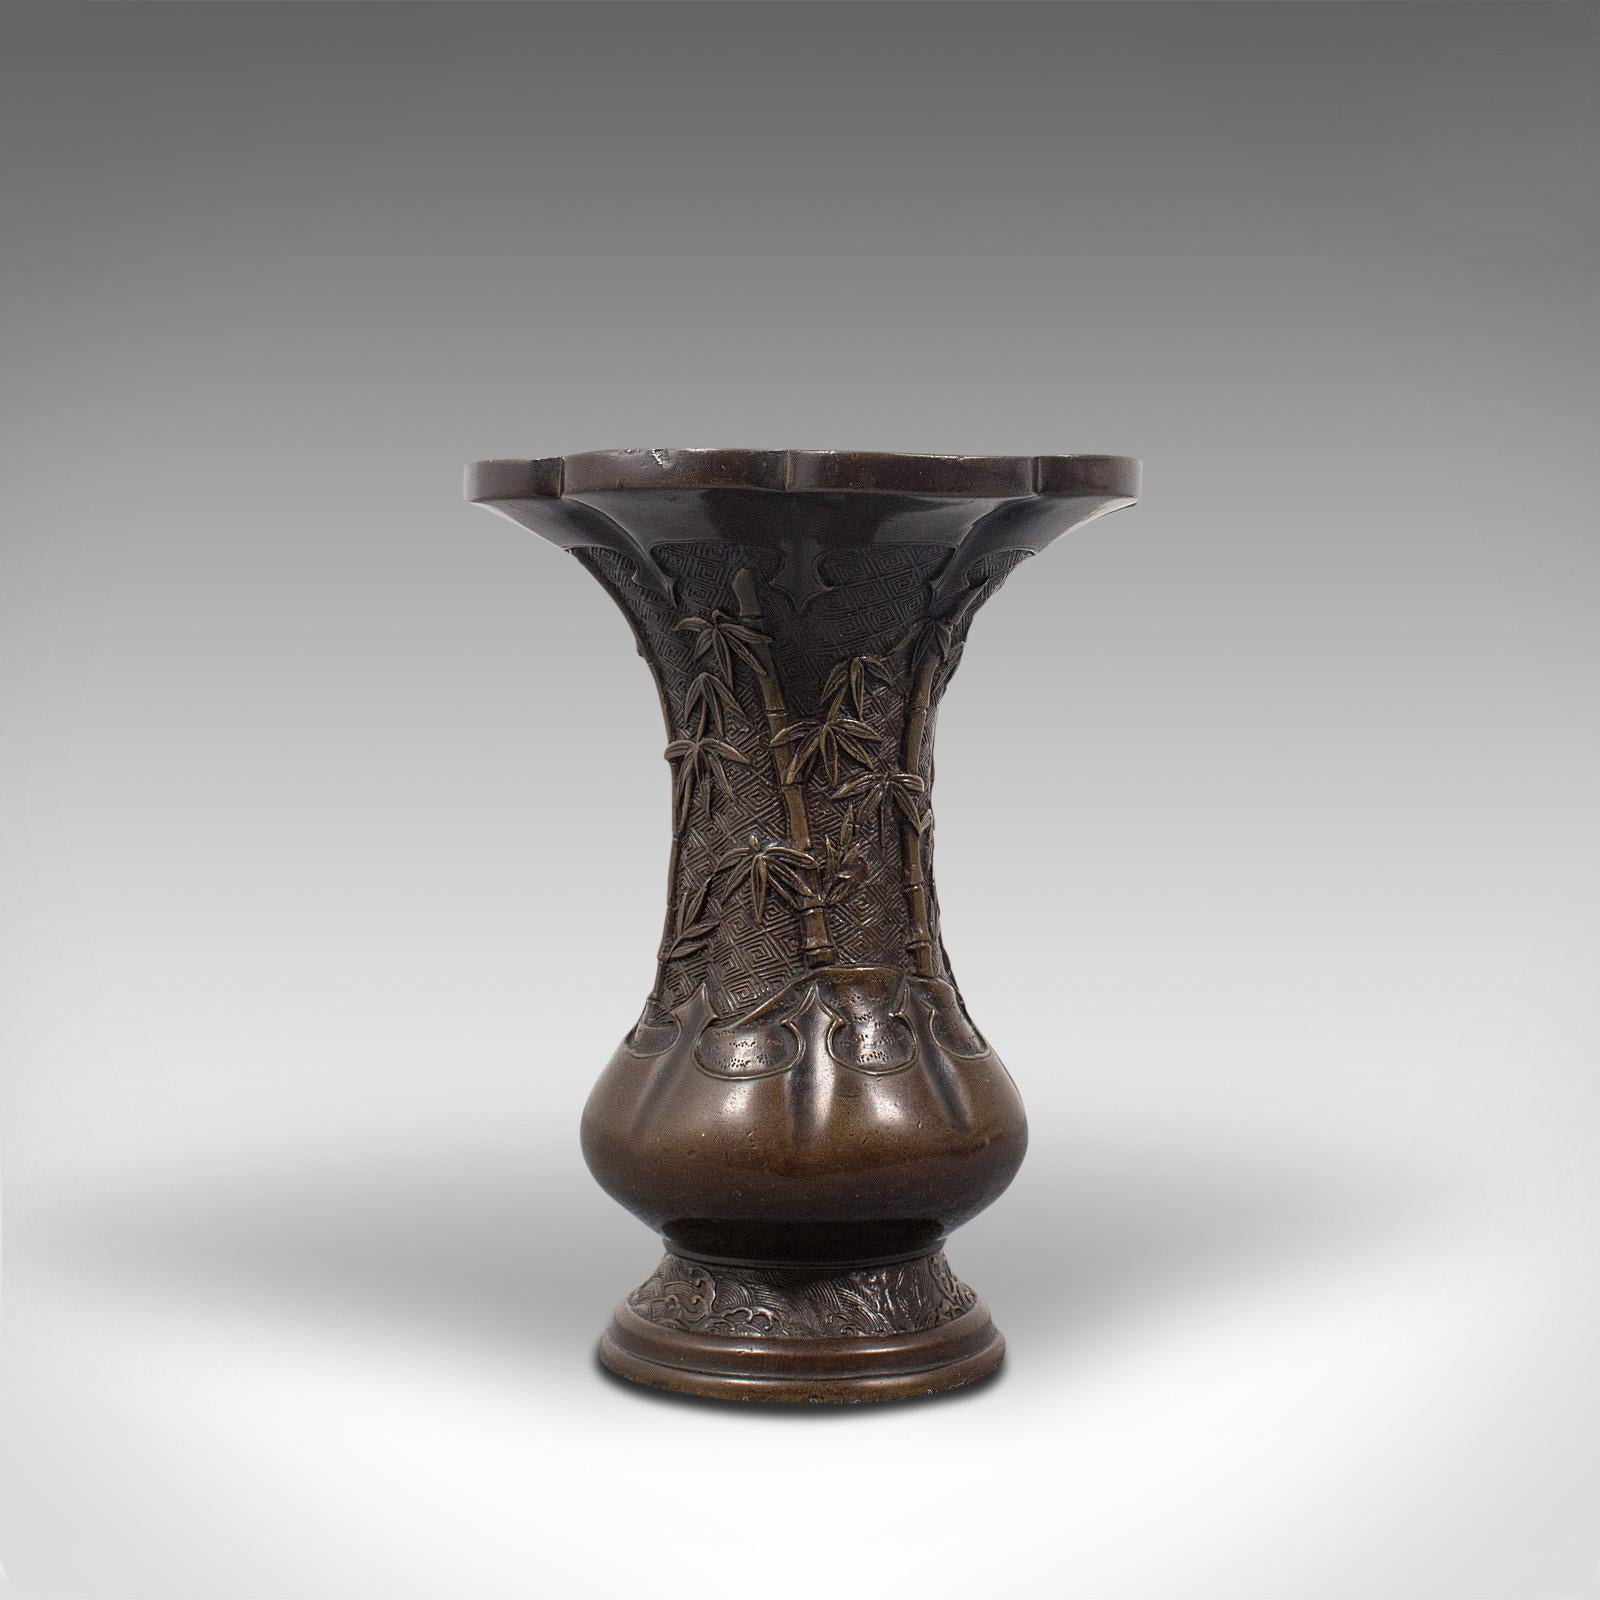 This is an antique Oriental vase. A Chinese, bronze decorative baluster urn, dating to the late Victorian period, circa 1900.

Superb decorative appeal
Displays a desirable aged patina - one small indent under close inspection
Flared bronze with